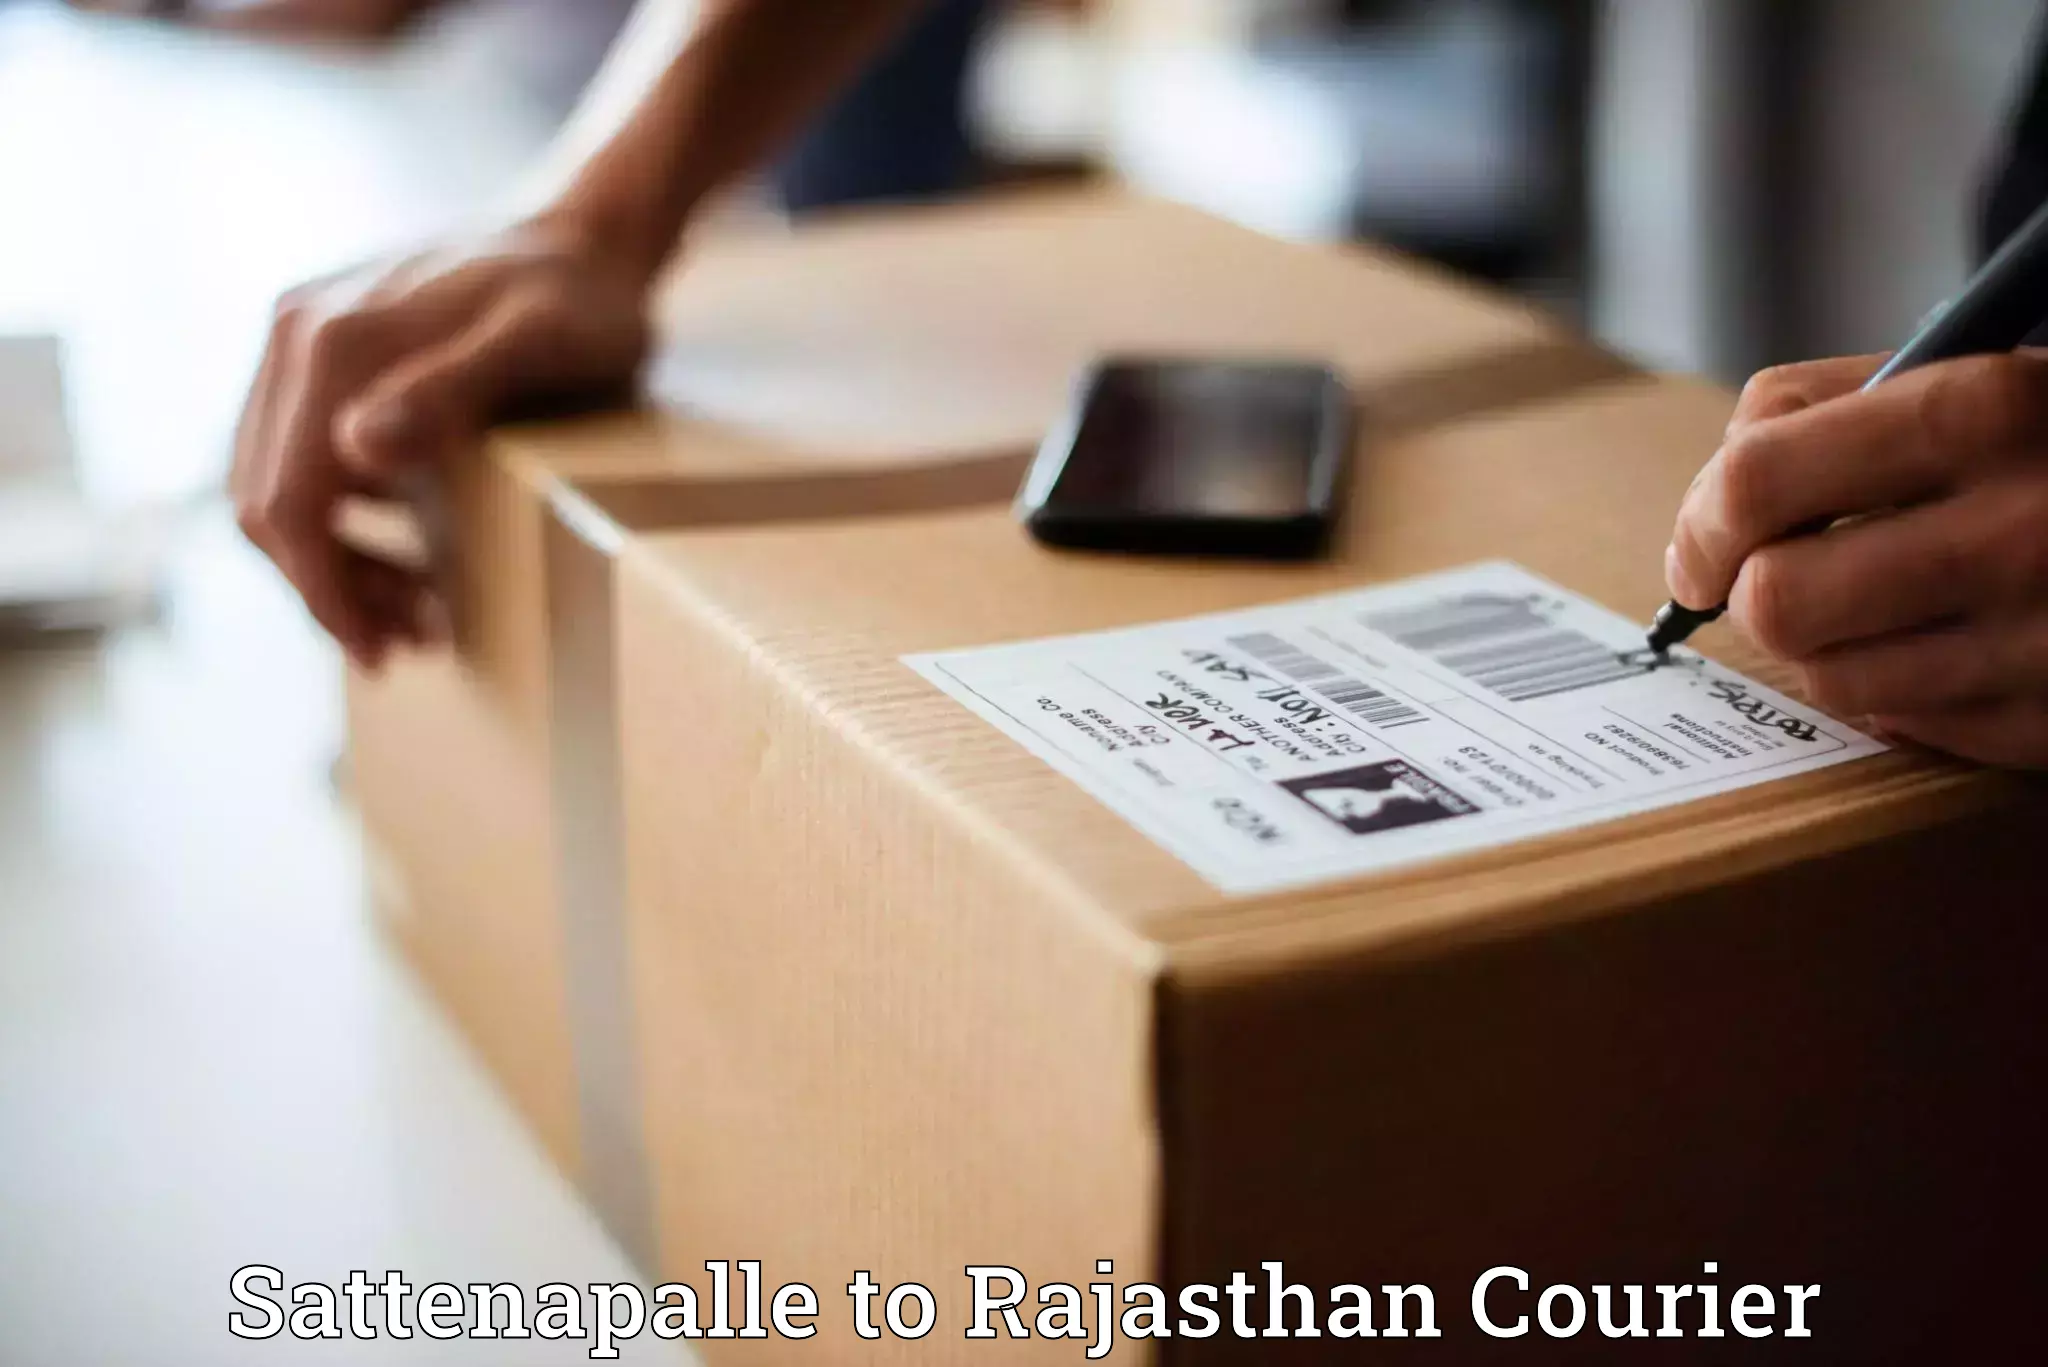 Global courier networks Sattenapalle to Suratgarh